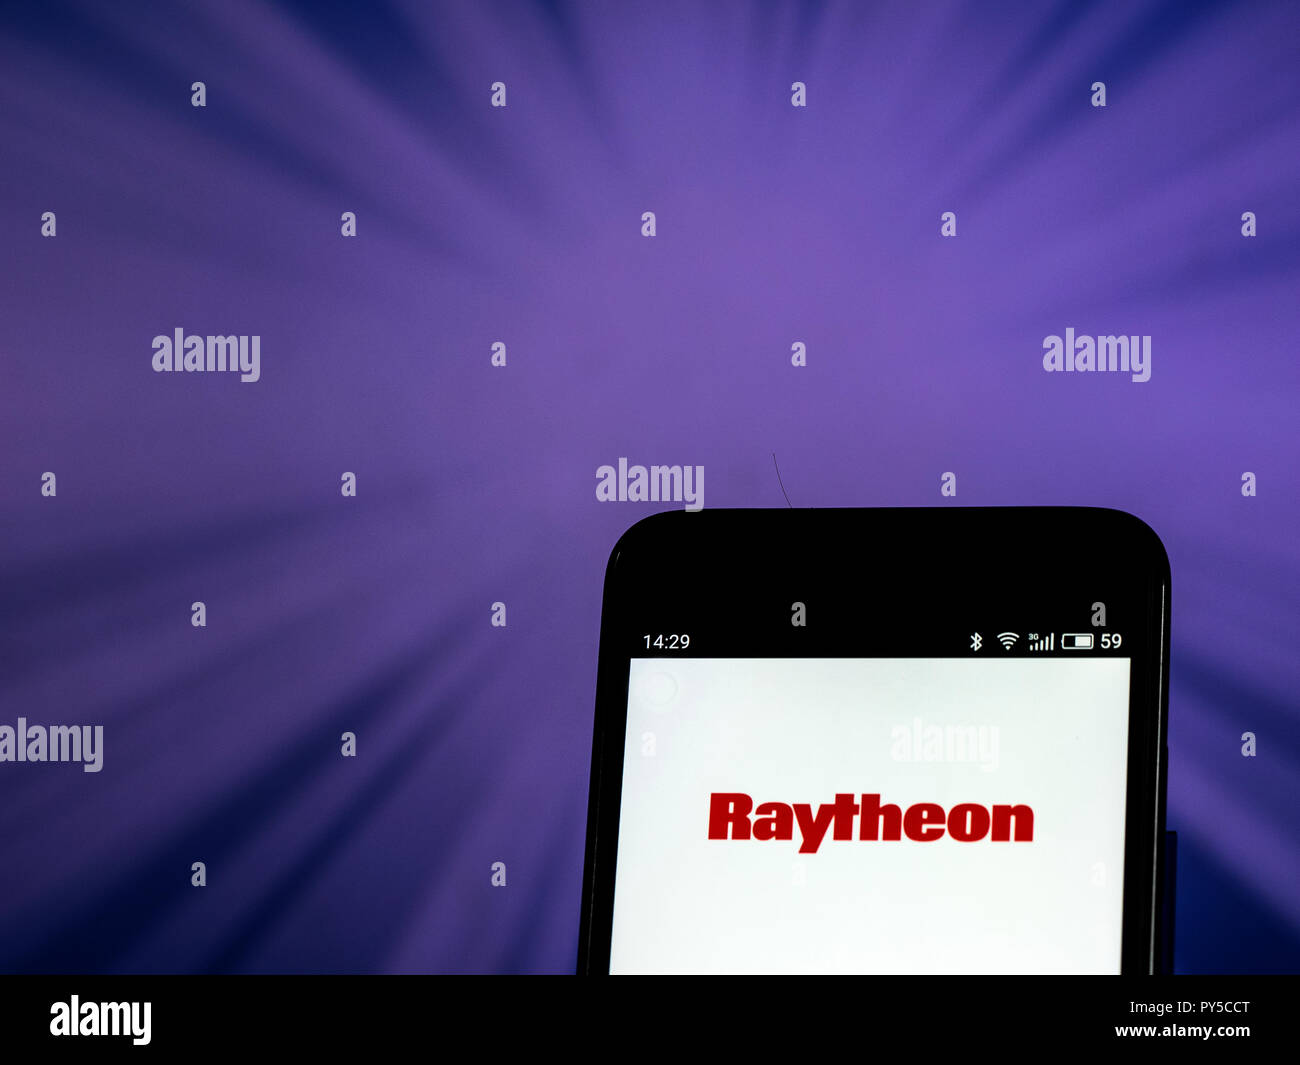 Raytheon Defense contractor company logo seen displayed on smart phone.The Raytheon Company is a major U.S. defense contractor and industrial corporation with core manufacturing concentrations in weapons and military and commercial electronics. Stock Photo